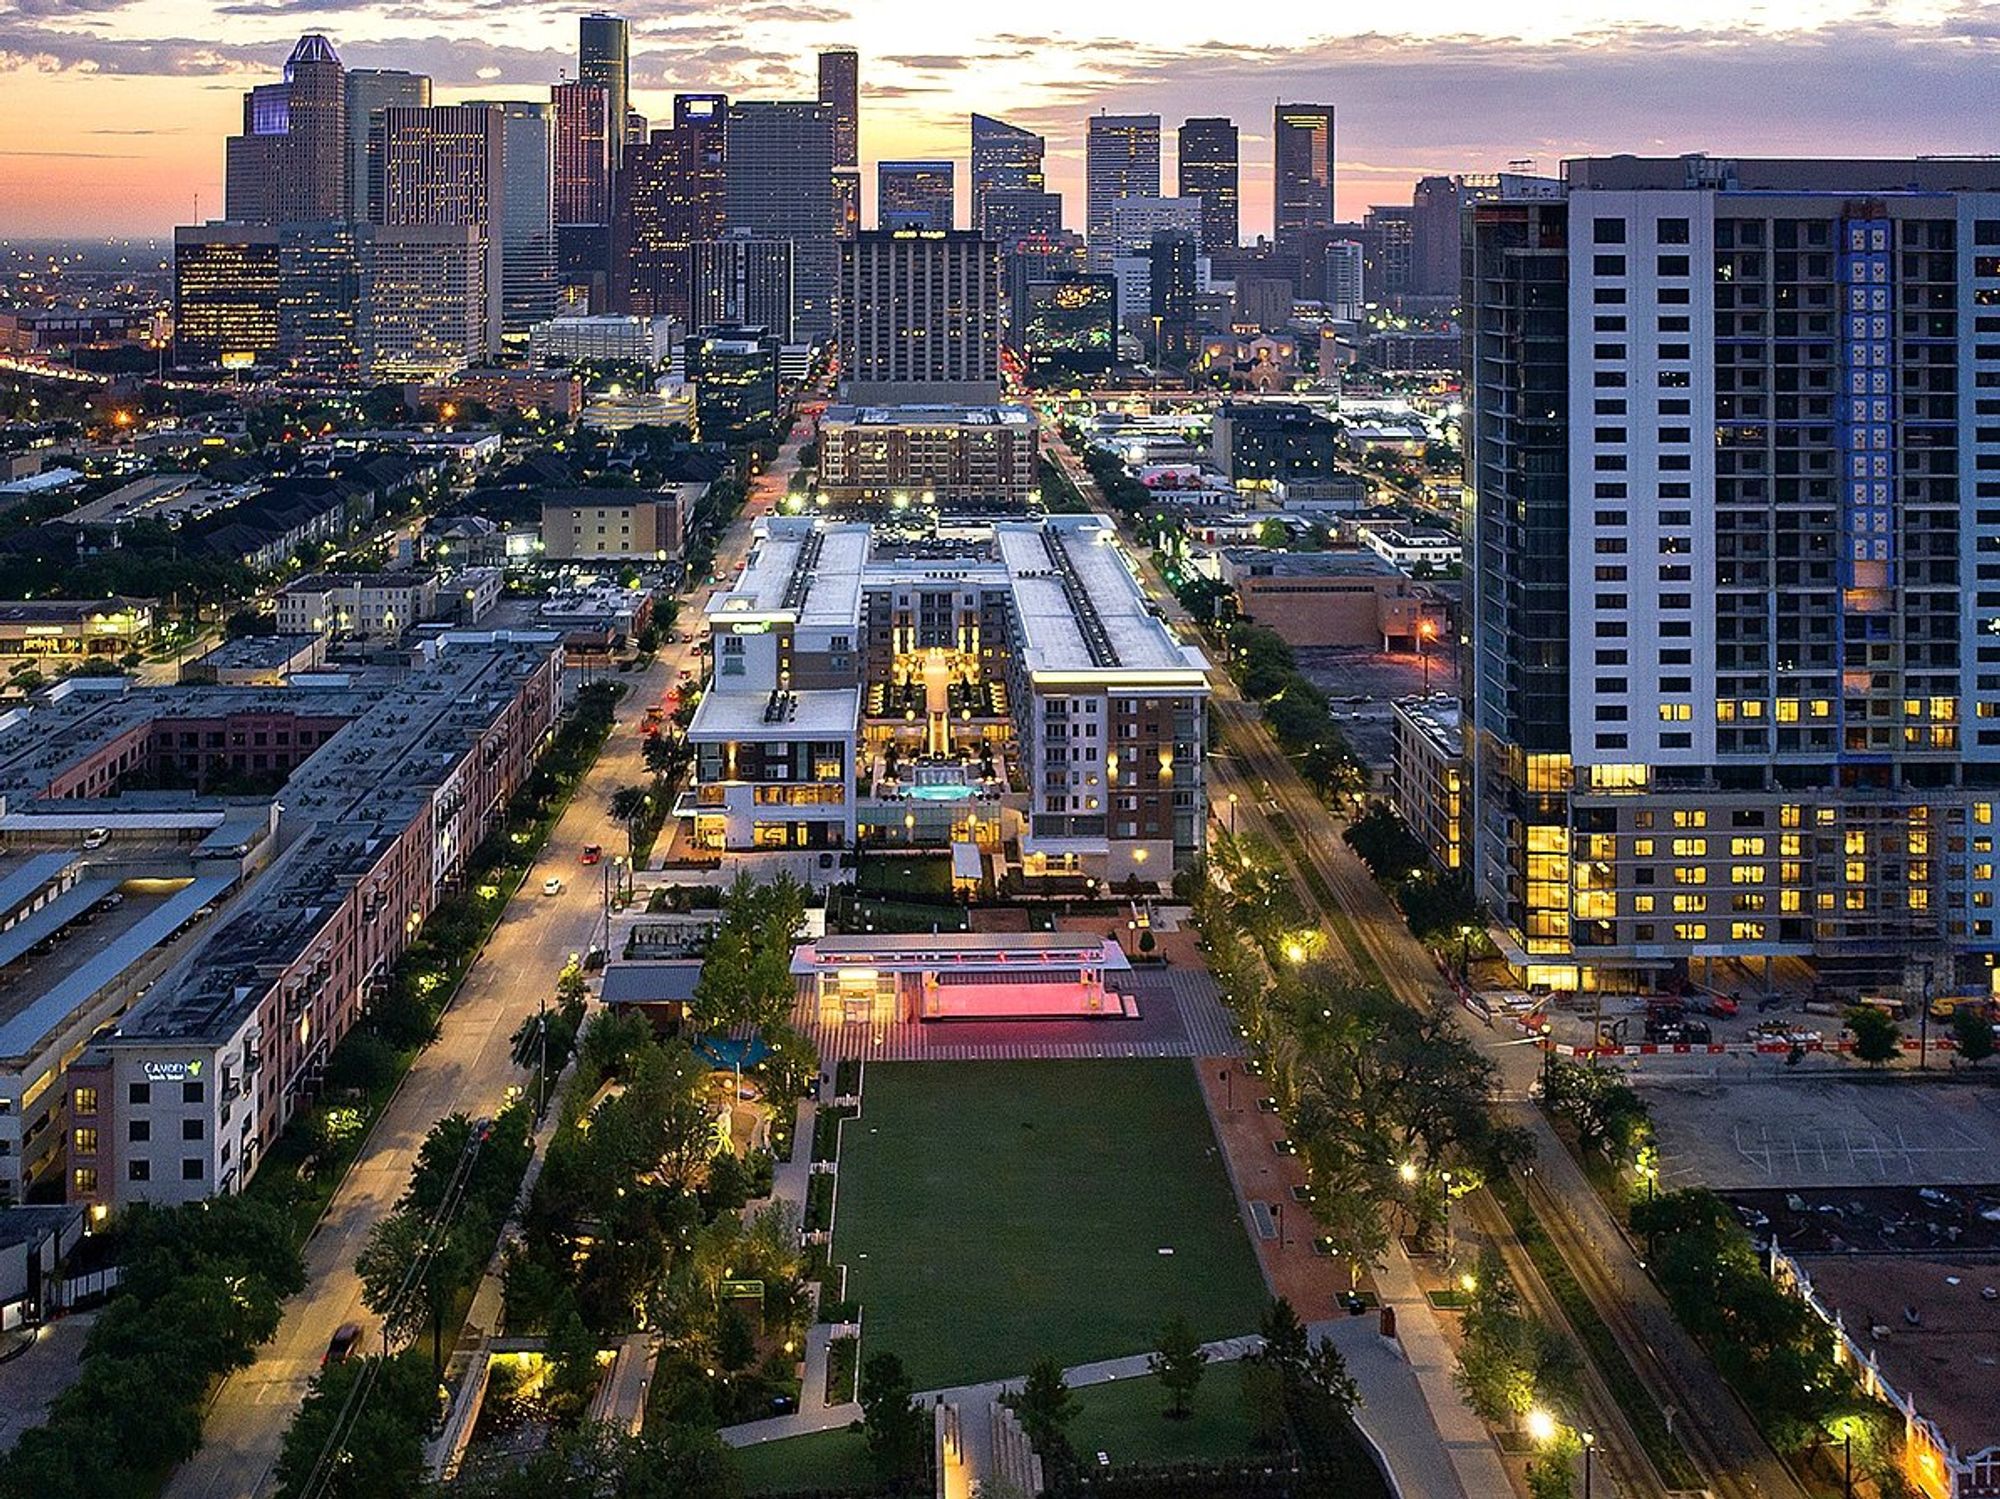 Downtown's newest park welcomes Houstonians with '3 times the fun' grand  opening celebration - CultureMap Houston